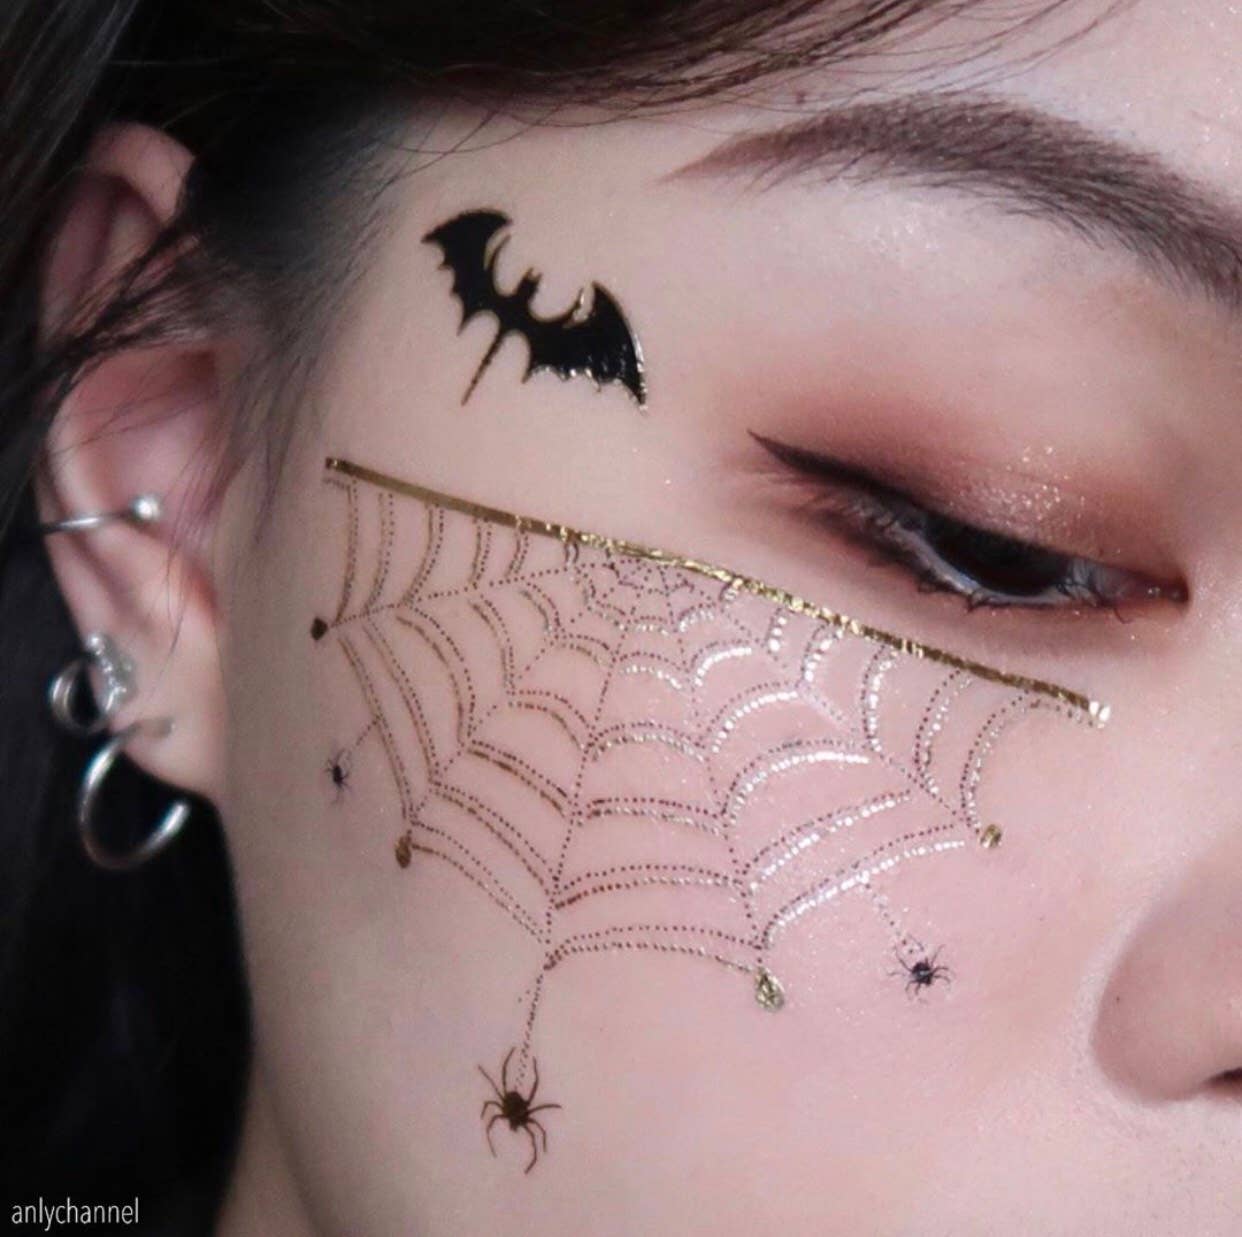 1 Sheet Washable Temporary Tattoo Decal, Pvc Material, Black Spider Web  Design, Gothic Style, Waterproof & Sweatproof, Suitable For Trendy Daily  Use | SHEIN